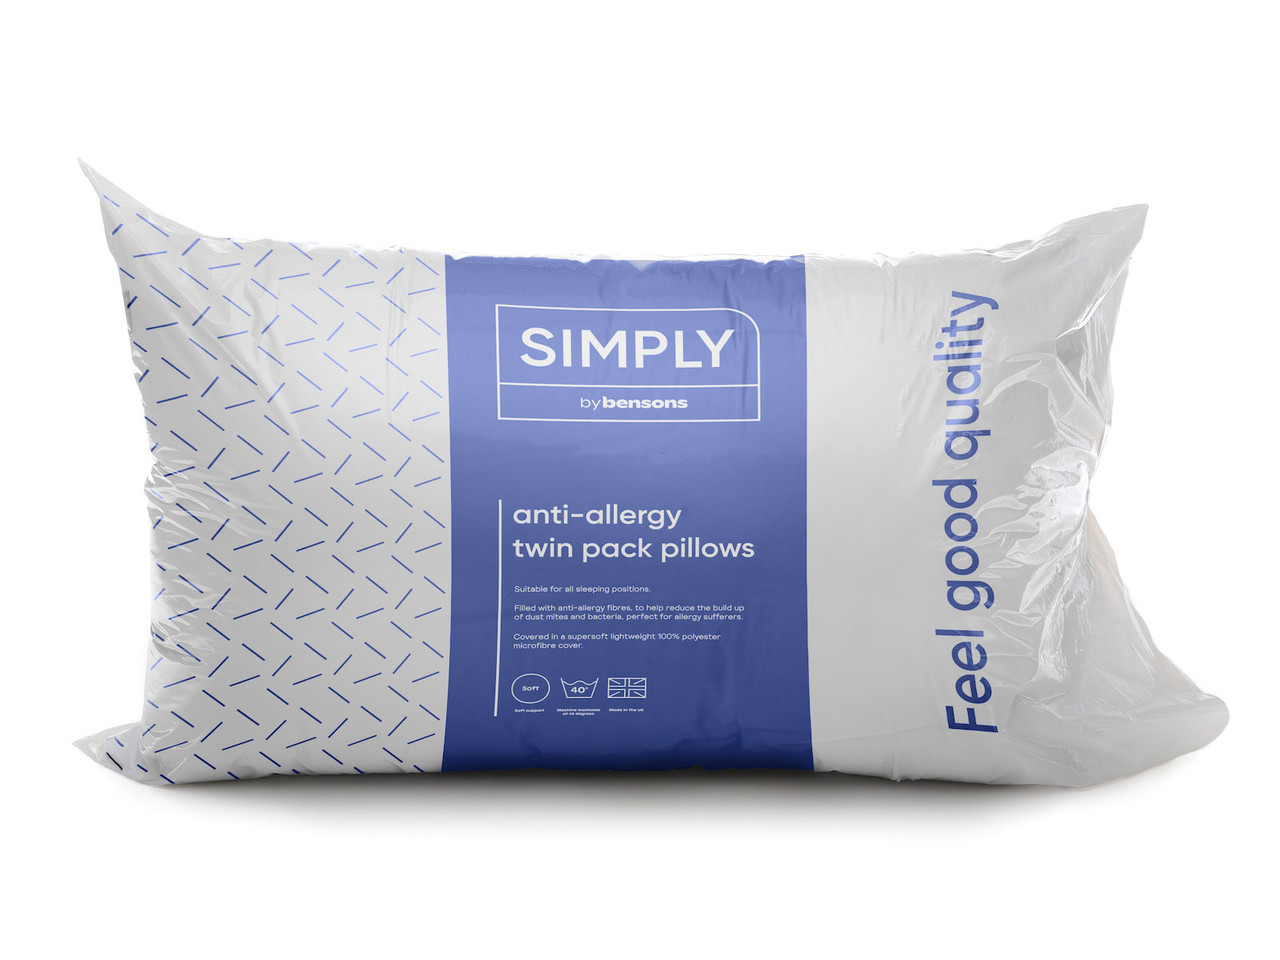 Simply by Bensons Anti-Allergy Twin Pack Pillows